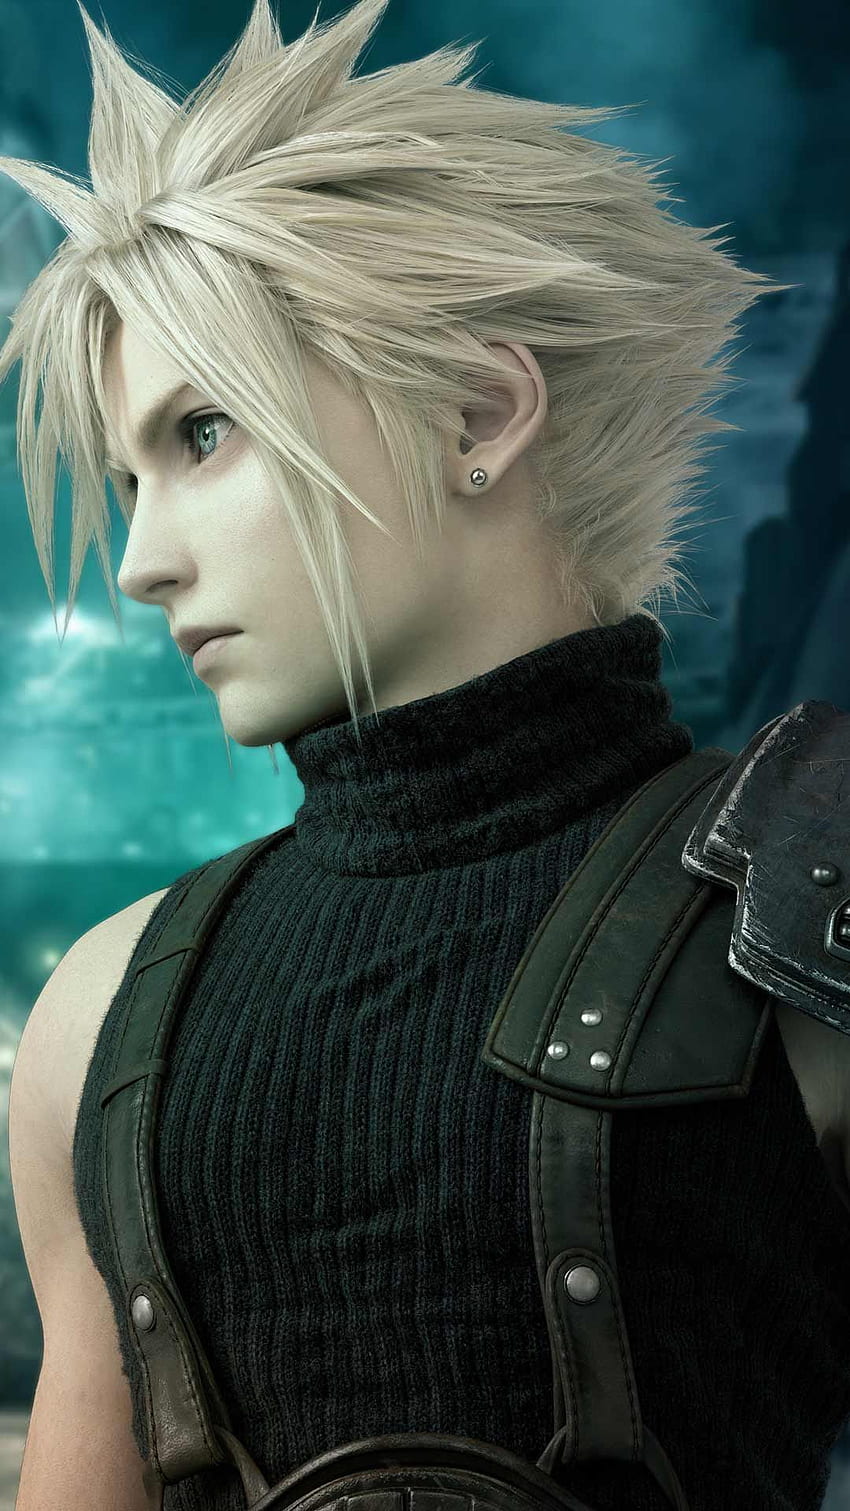 Final Fantasy 7 Remake phone background PS4 game art poster logo on iPhone andro ในปี 2020 Final Fantasy Cloud Strife, Final Fantasy Vii Cloud, Final Fantasy, Cloud FF7 Remake วอลล์เปเปอร์โทรศัพท์ HD